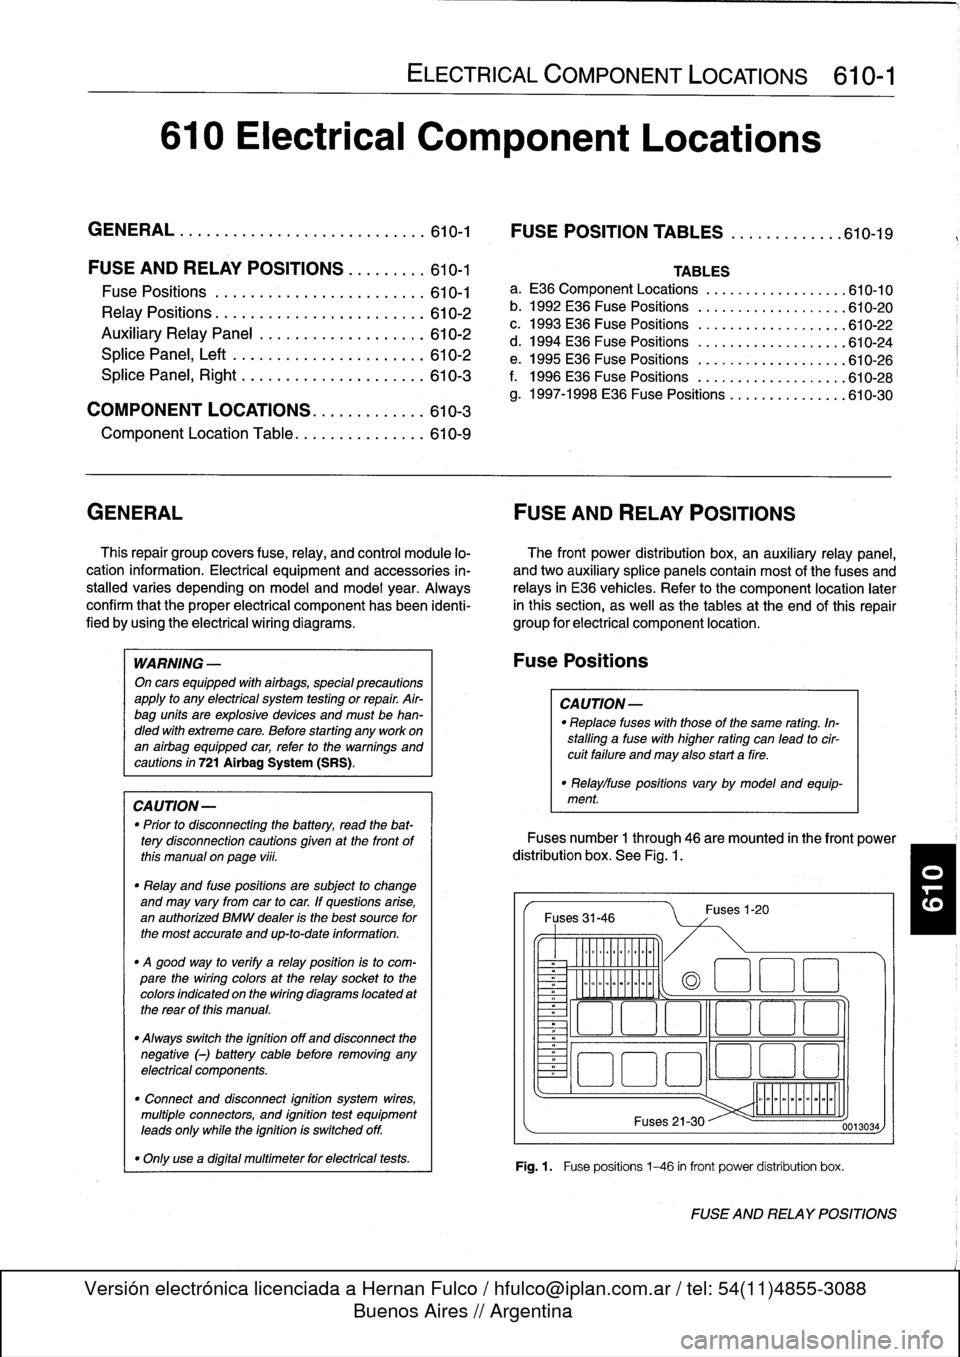 BMW M3 1996 E36 Workshop Manual 
610
Electrical
Component
Locations

GENERAL
...........
.
.
.
.
.
.
.
.
.
........
610-1

	

FOSE
POSITION
TABLES
..
.
.
.
.
.
.....
.
610-19

FUSE
AND
RELAY
POSITIONS
.
...
.
.
.
.
.
610-1

Fuse
Pos